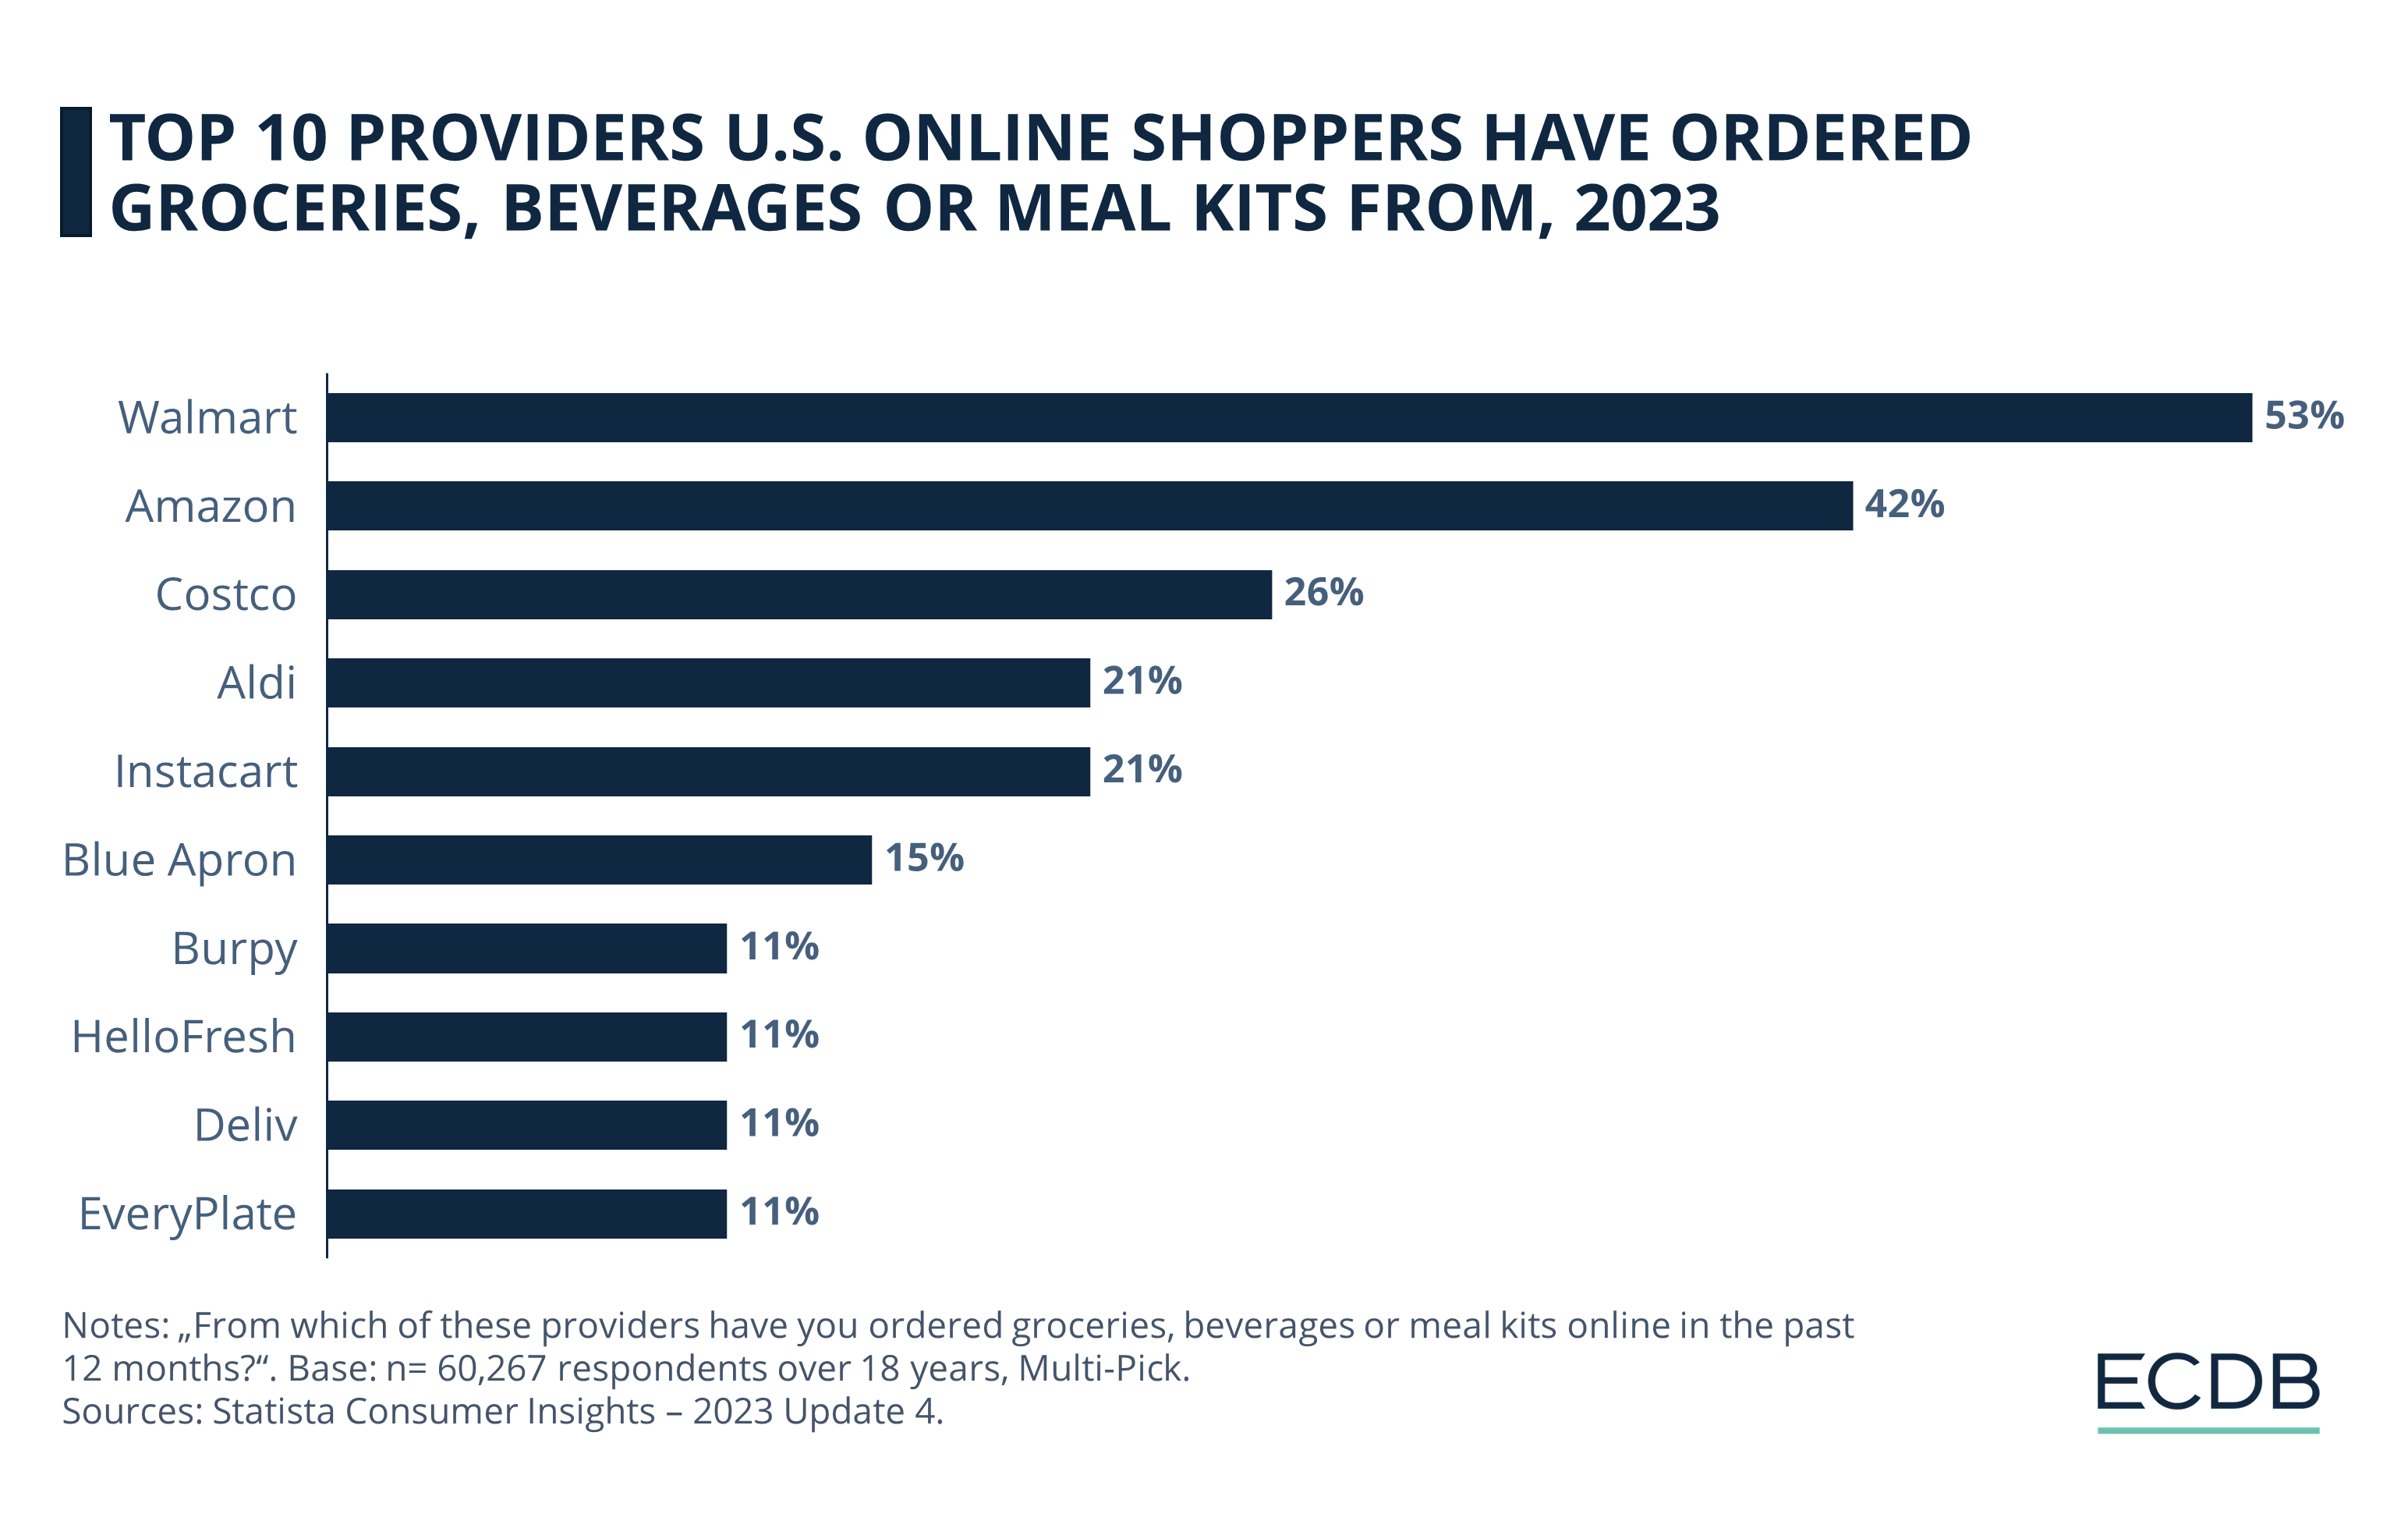 Top 10 Providers U.S. Online Shoppers Have Ordered Groceries, Beverages or Meal Kits From, 2023